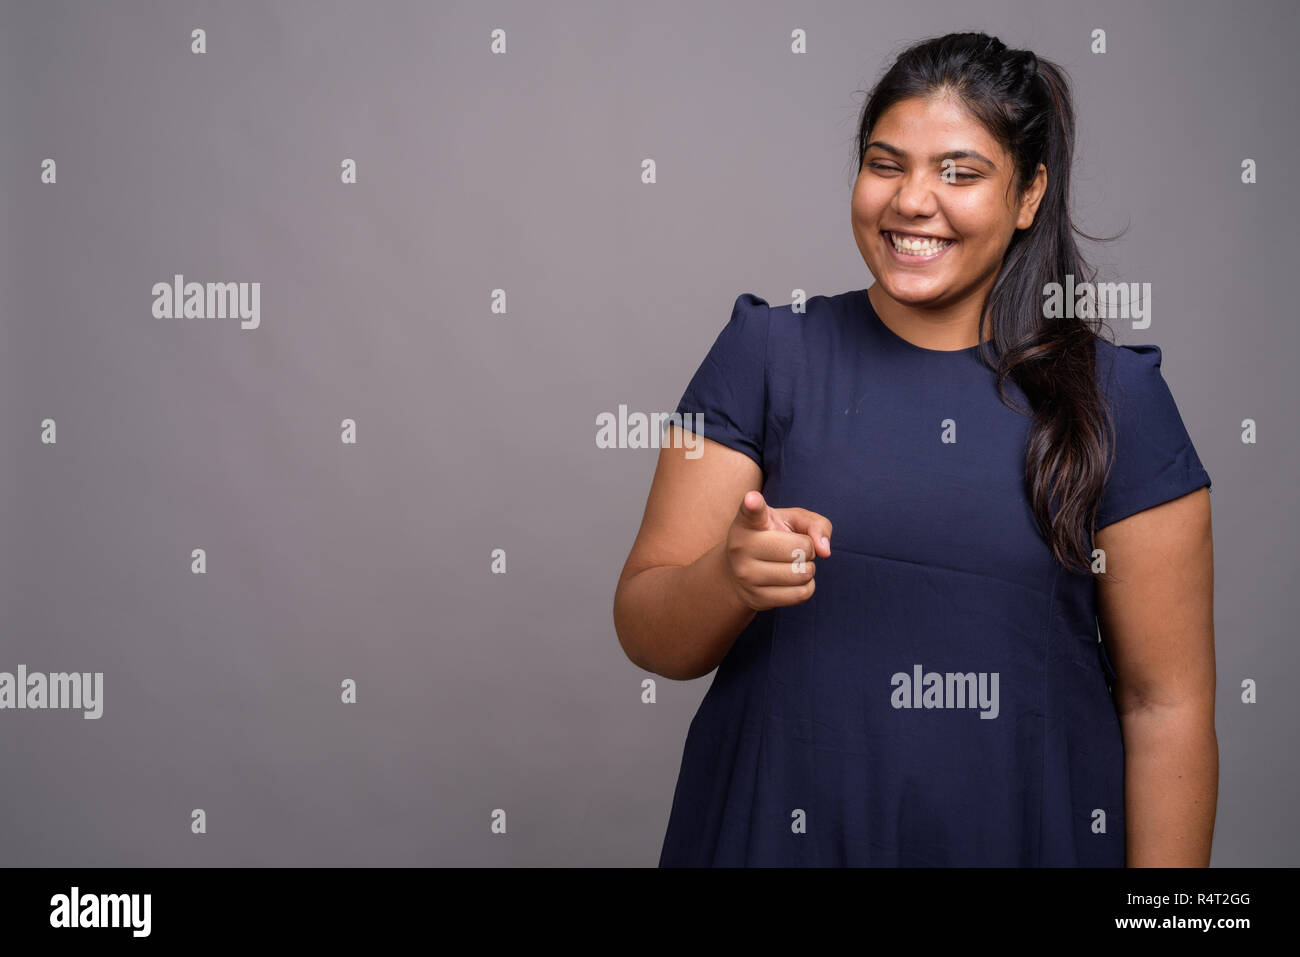 Young overweight beautiful Indian woman against gray background Stock Photo